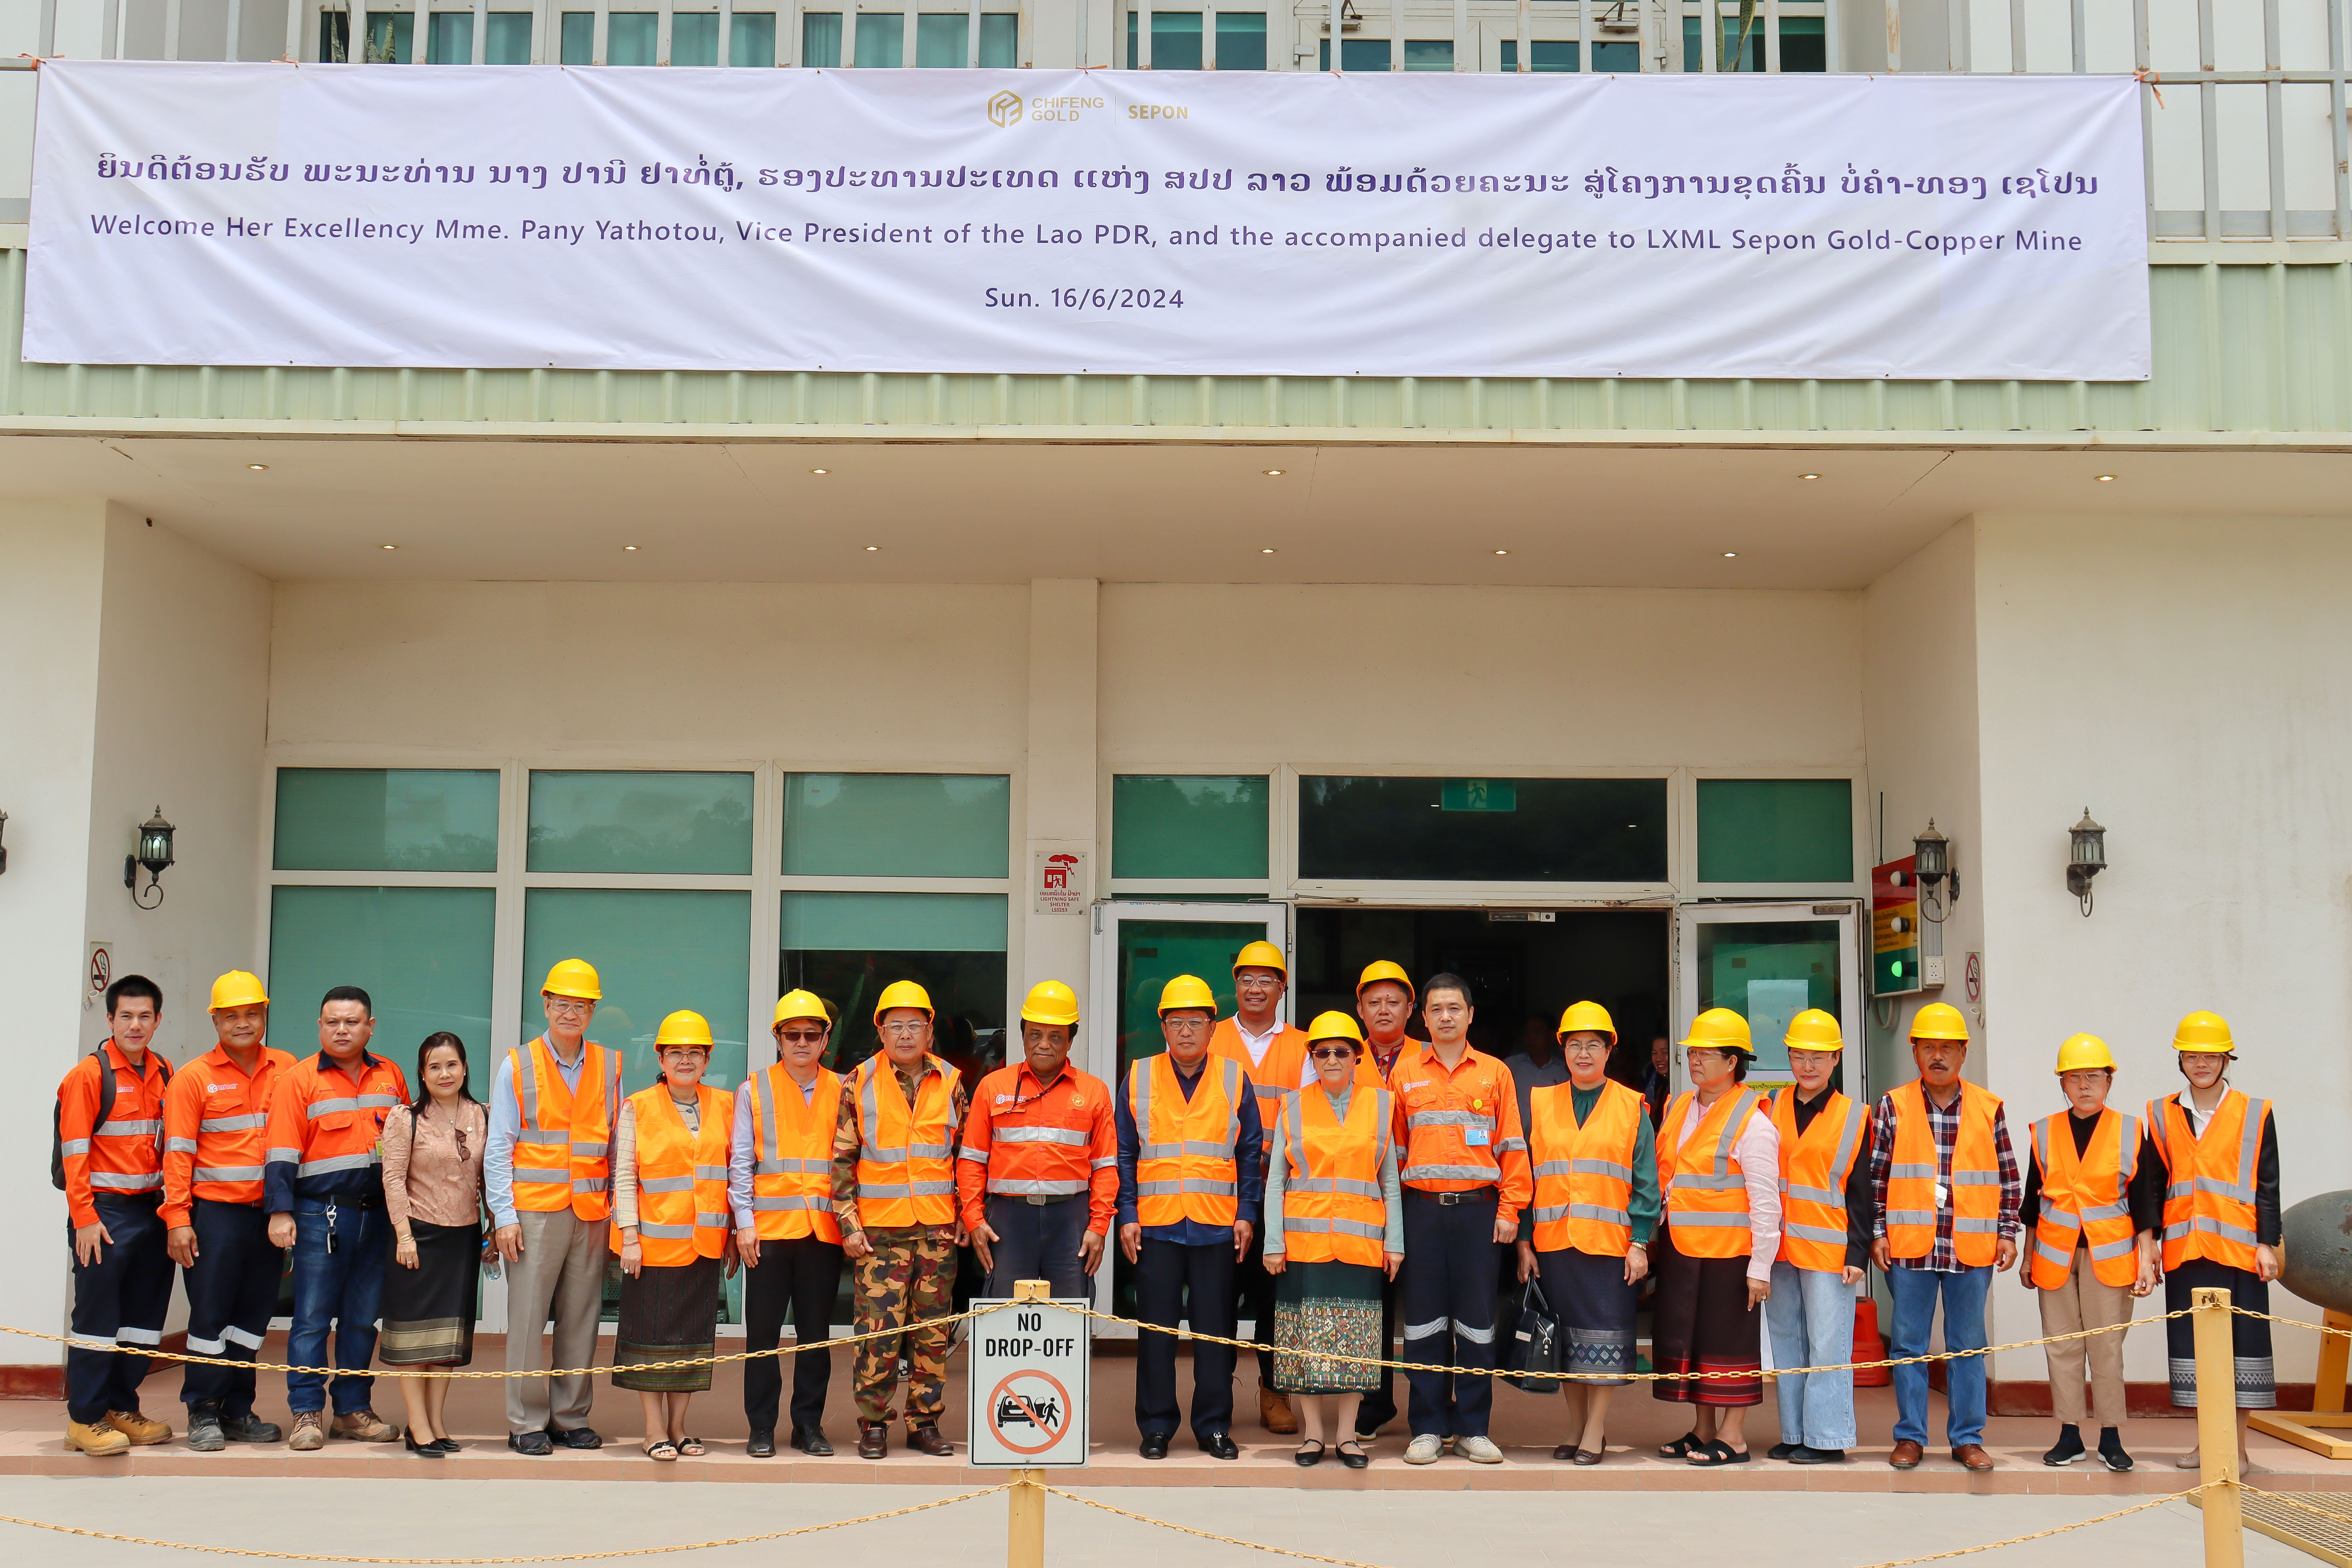 Vice President of the Lao PDR Visits to LXML's Sepon Mine